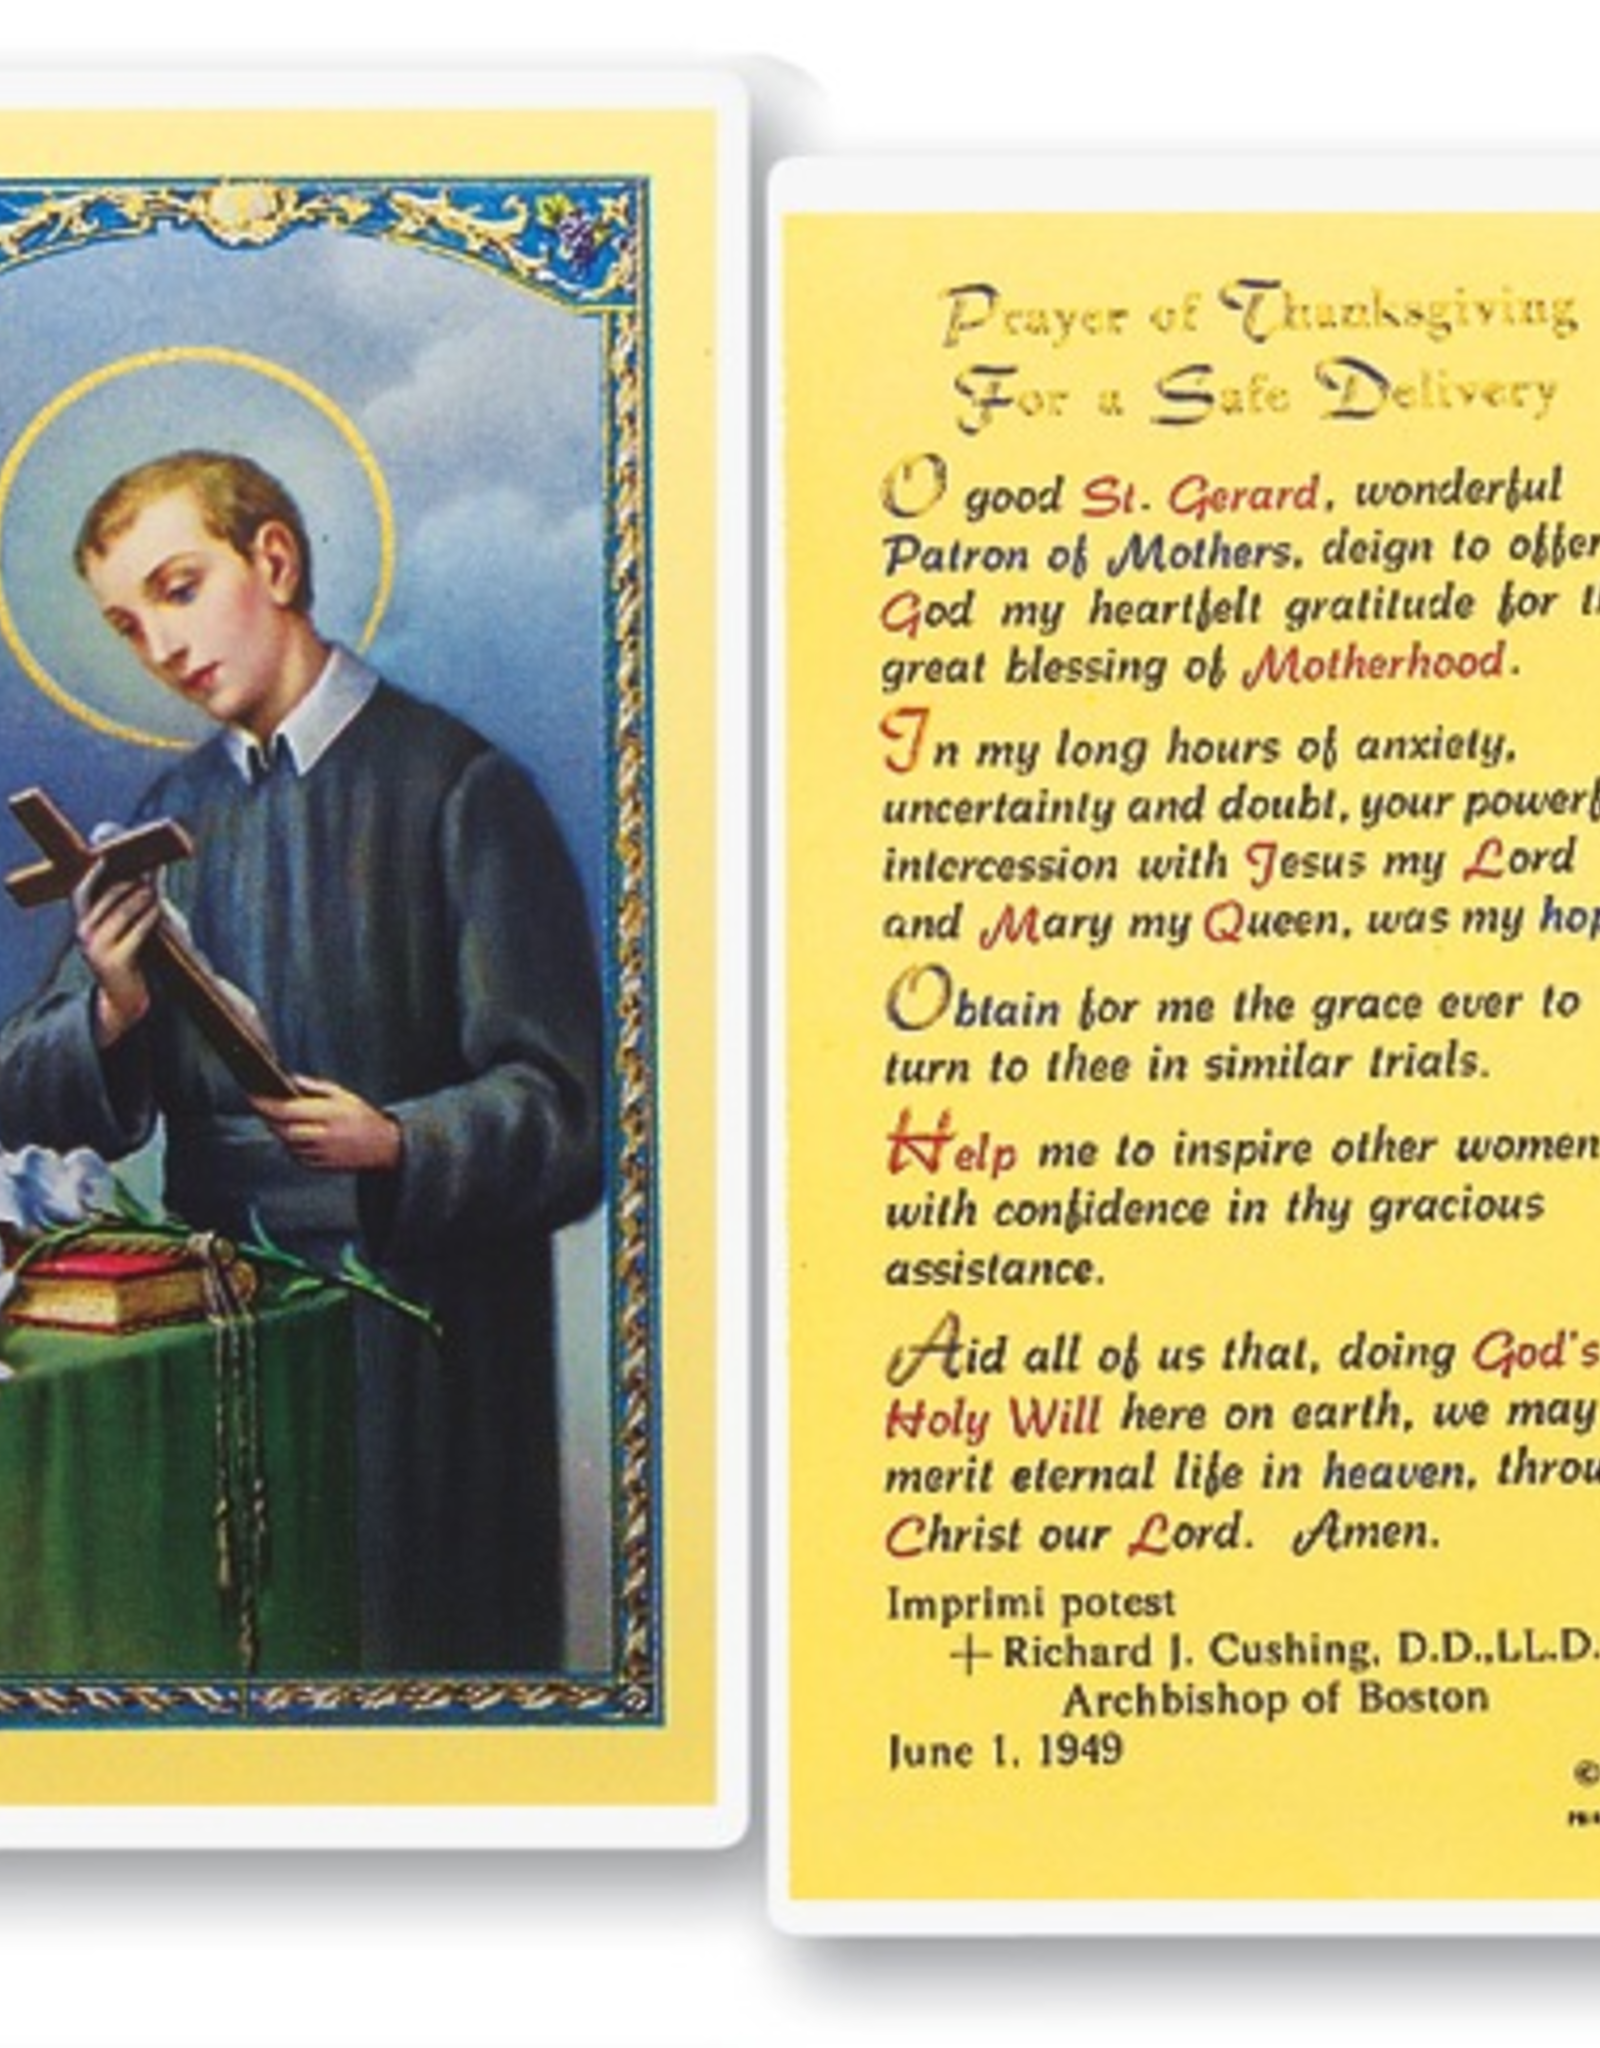 WJ Hirten St. Gerard (Prayer of Thanksgiving for a Safe Delivery) Holy Cards